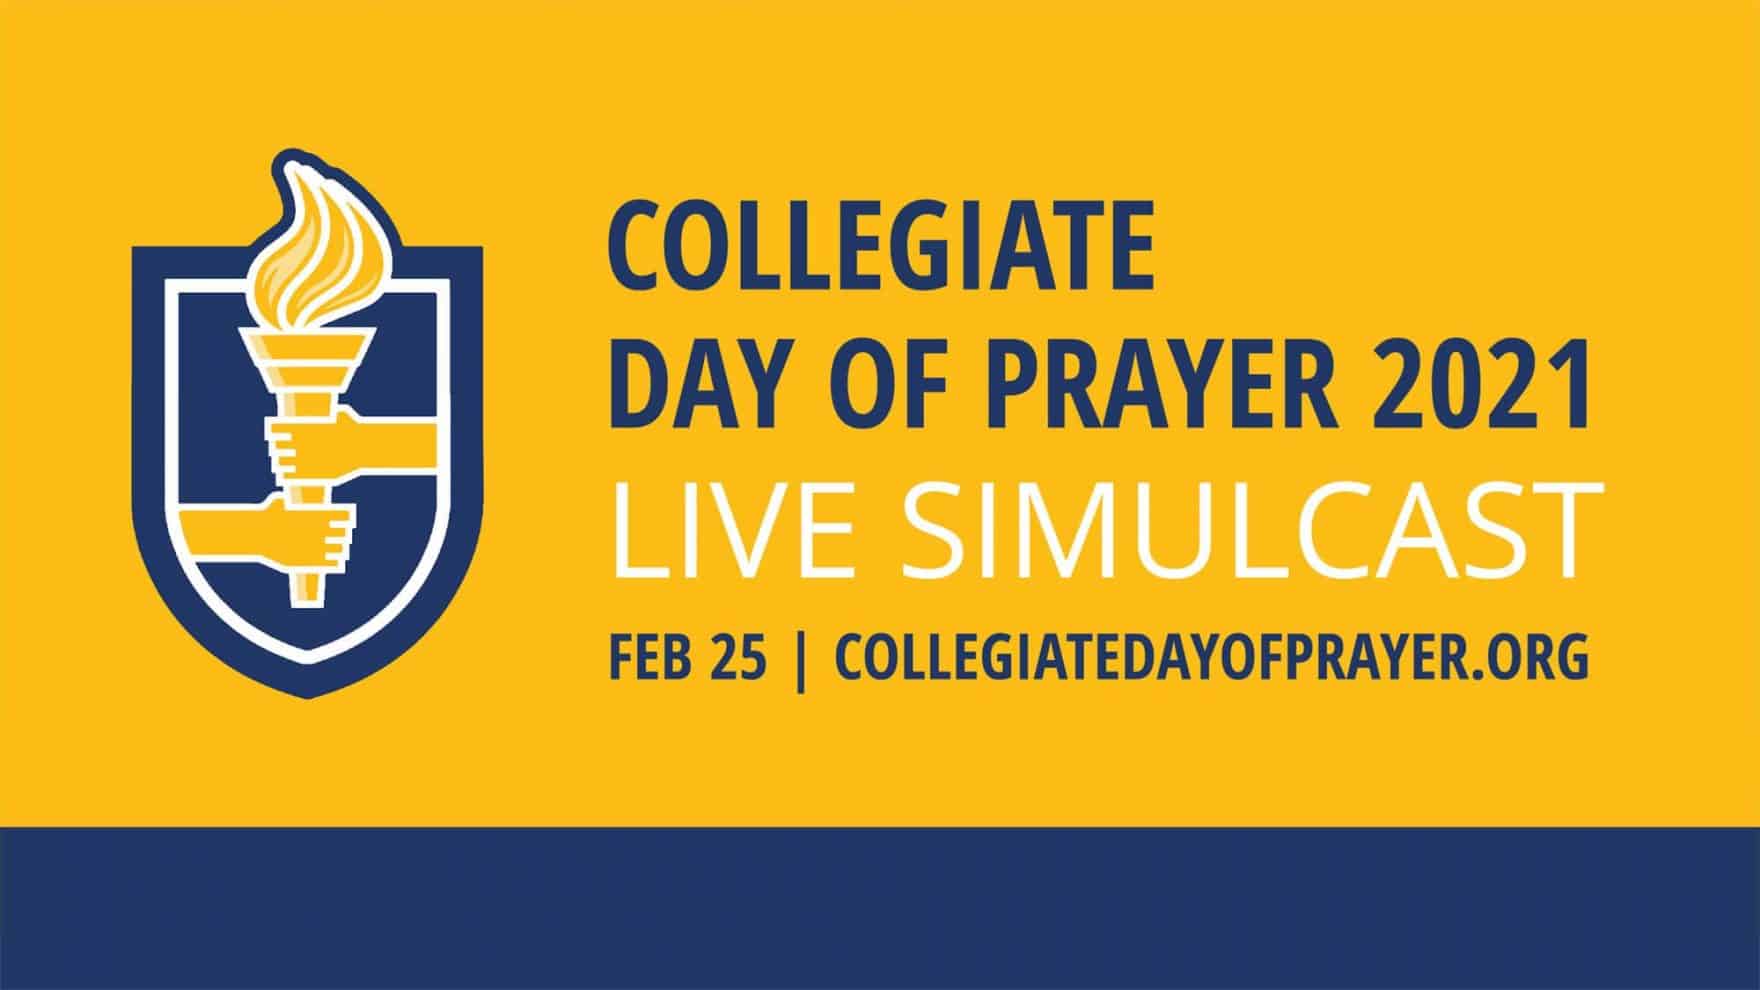 The national Collegiate Day of Prayer will be hosted by Regent, a premier Christian college located in Virginia Beach.